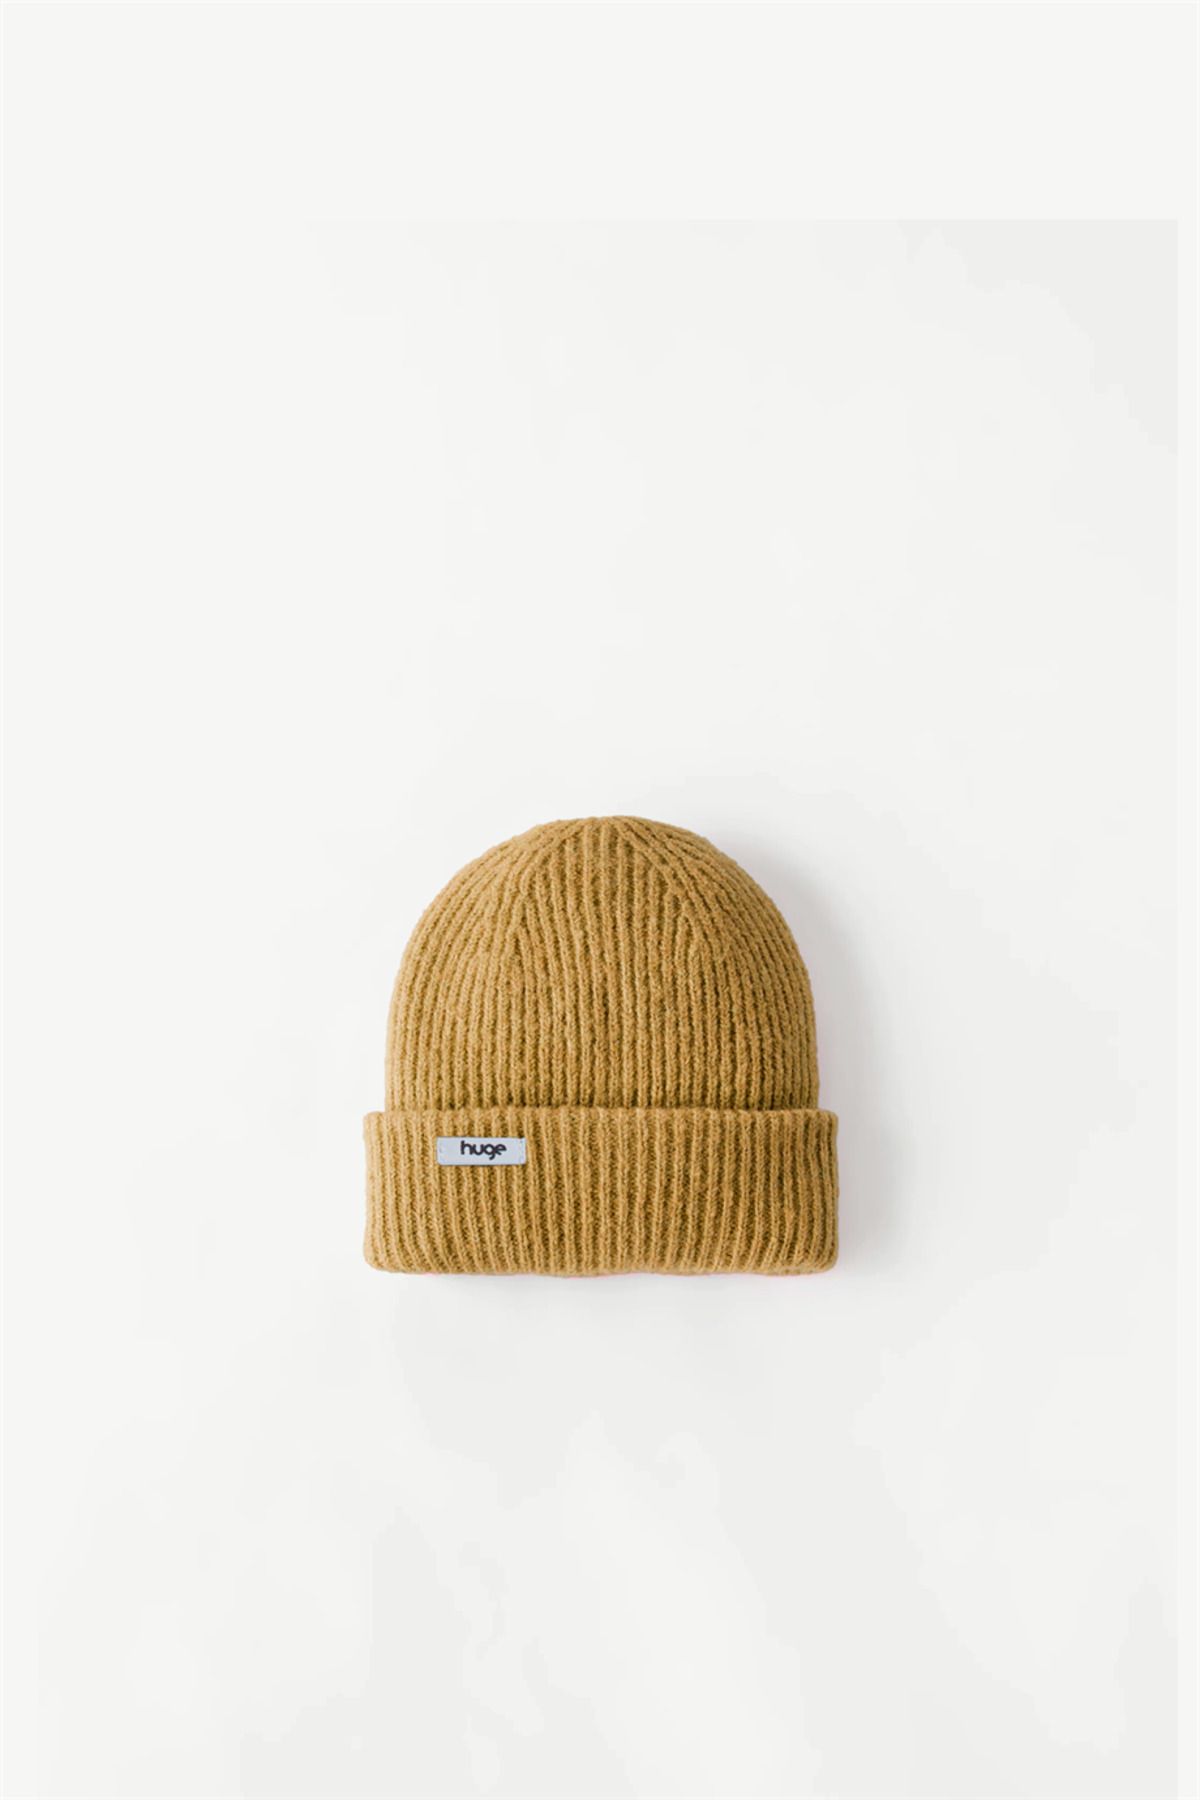 Huge Element Huge Beanie Small Tag Mustard